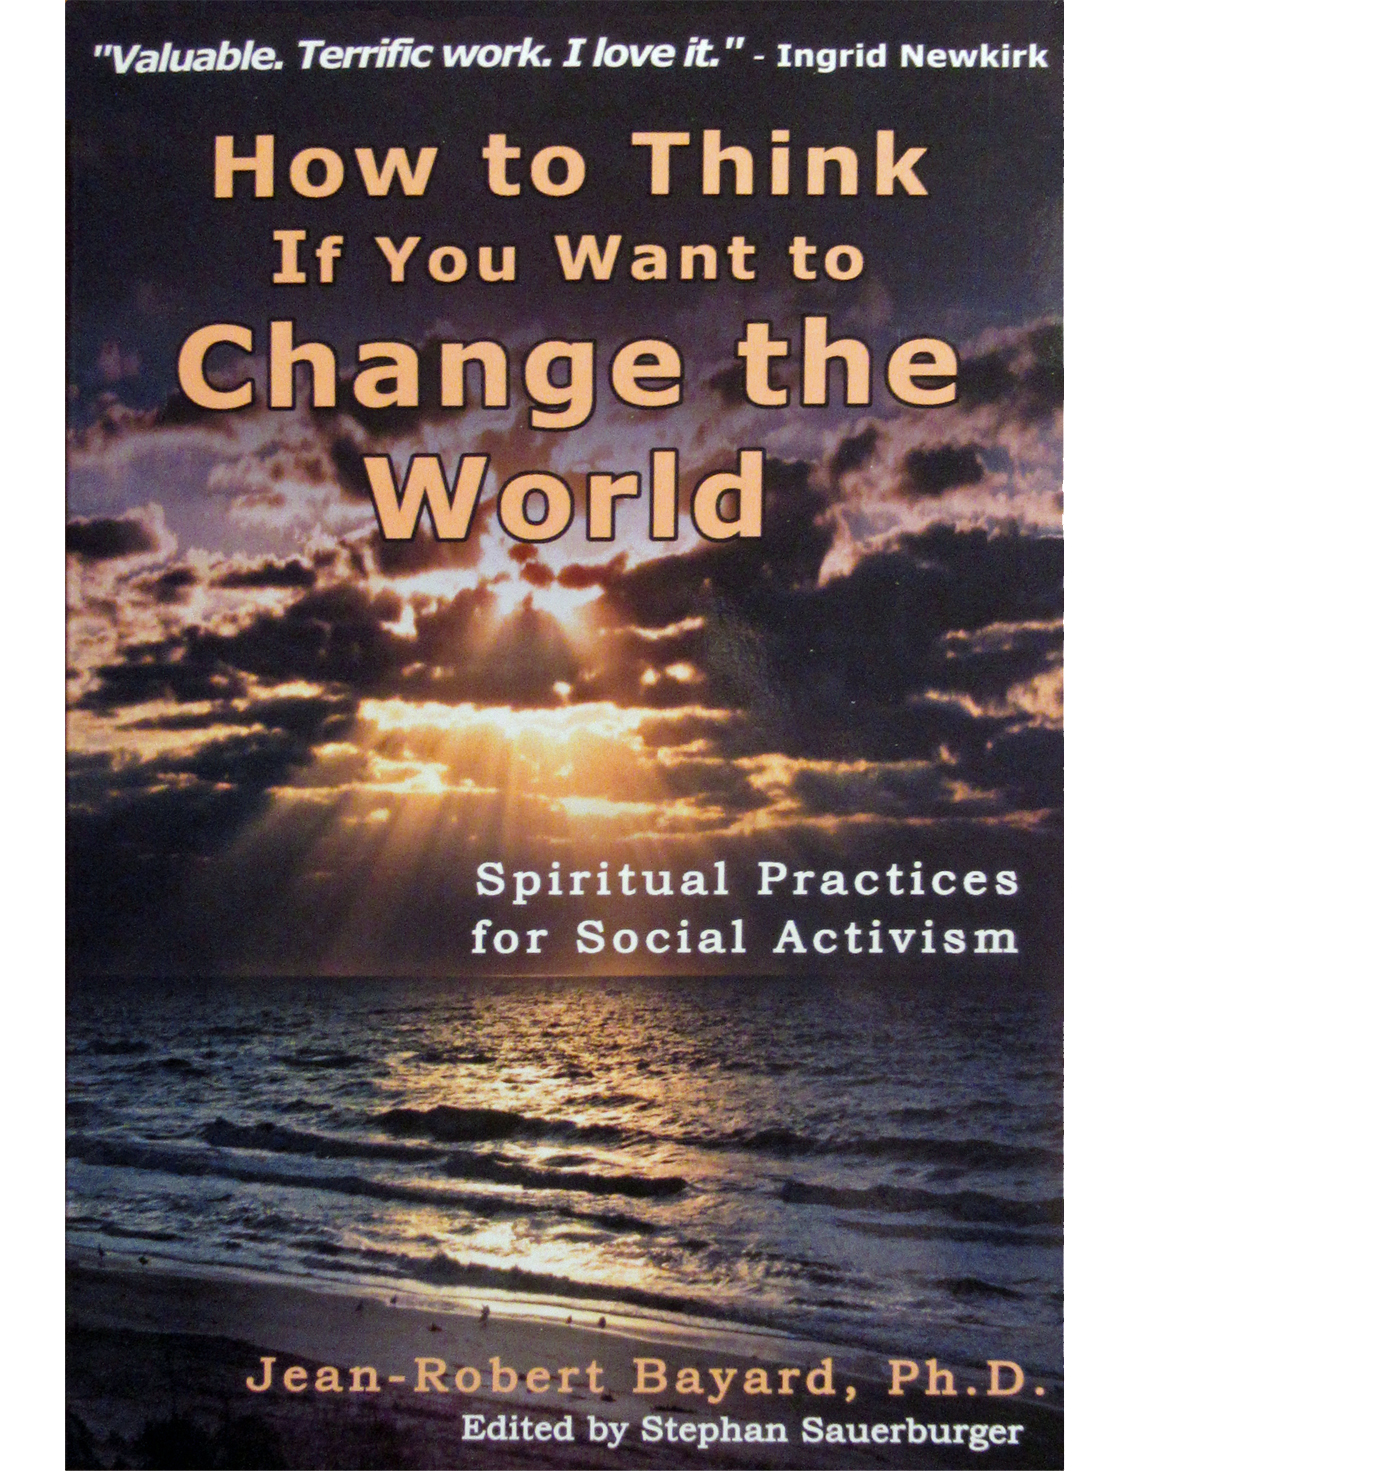 Photograph shows the book cover with a quote saying 'Valuable.  I love it.  I will quote from this terrific book.' Ingrid Newkirk, President, People for the Ethical Treatment of Animals.